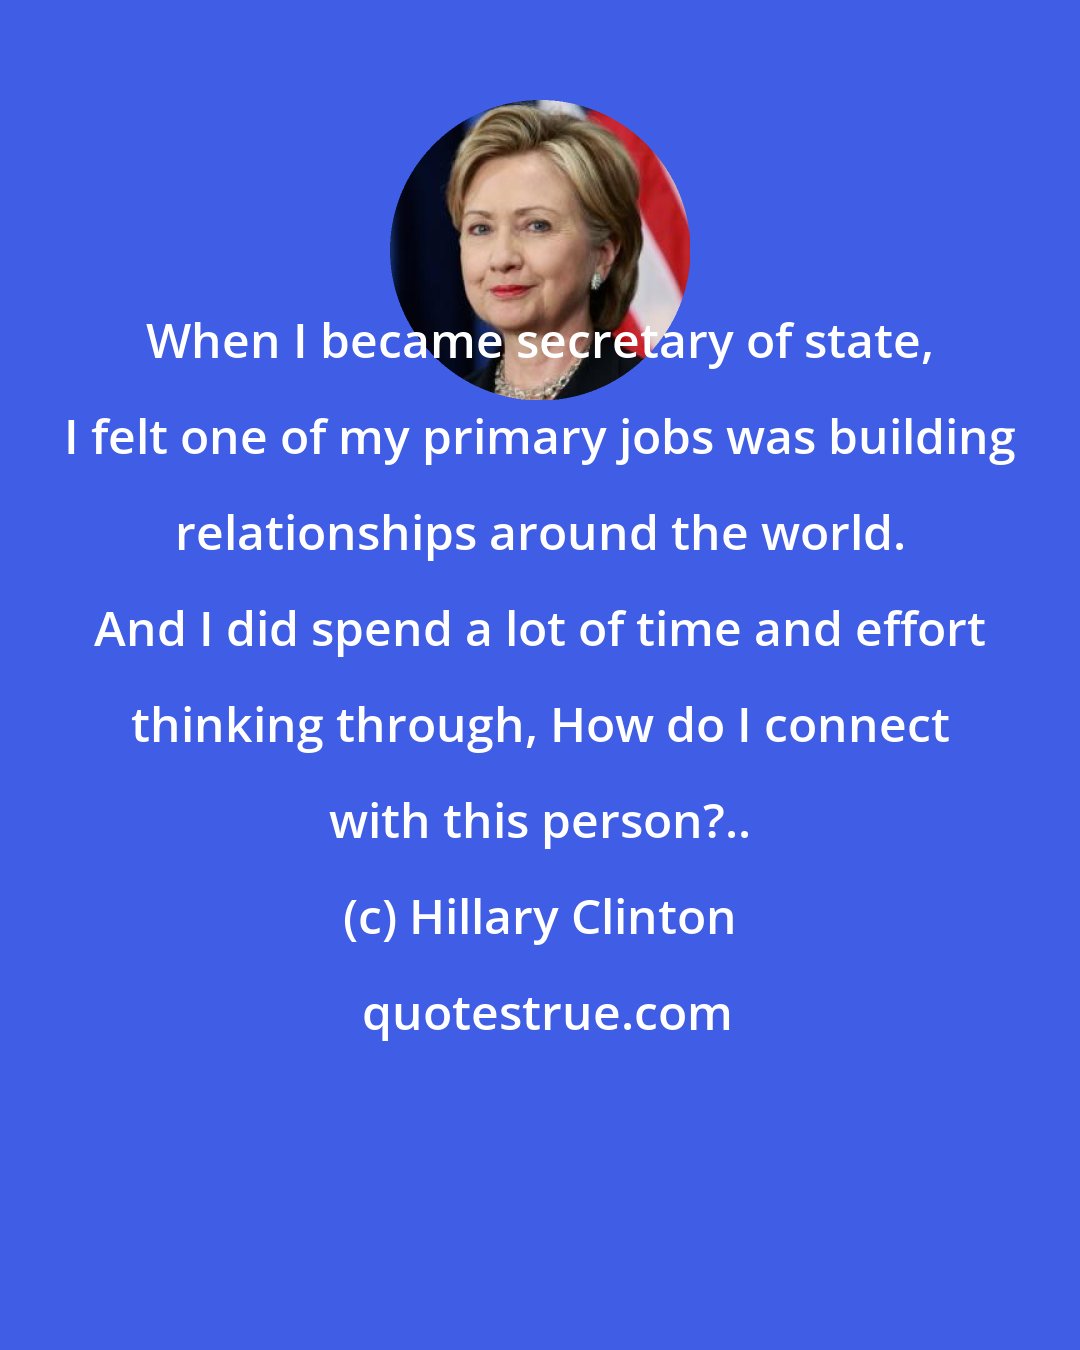 Hillary Clinton: When I became secretary of state, I felt one of my primary jobs was building relationships around the world. And I did spend a lot of time and effort thinking through, How do I connect with this person?..